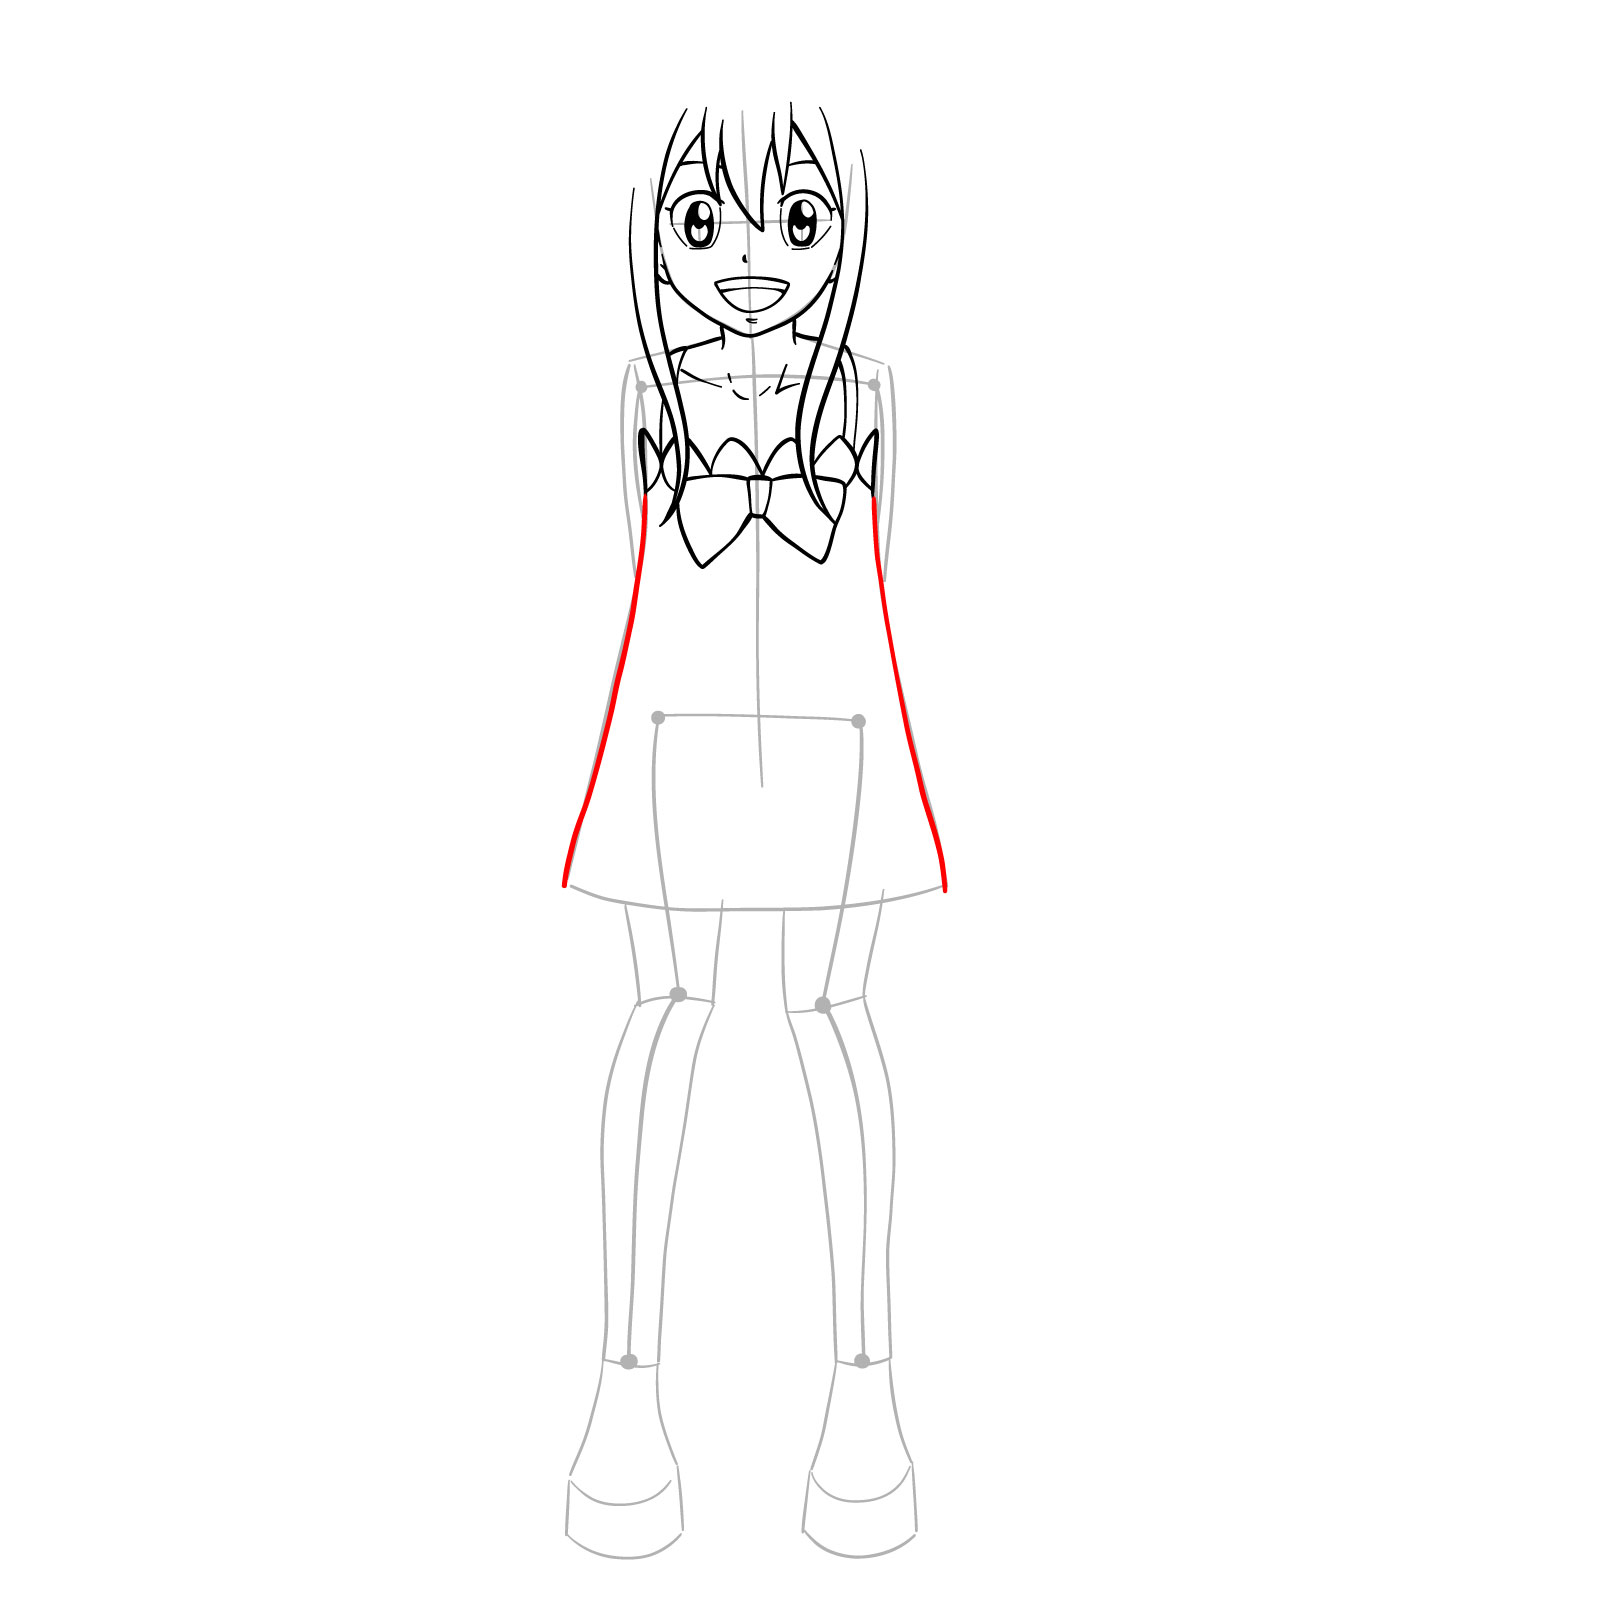 How to draw Wendy Marvell from Fairy Tail - step 12